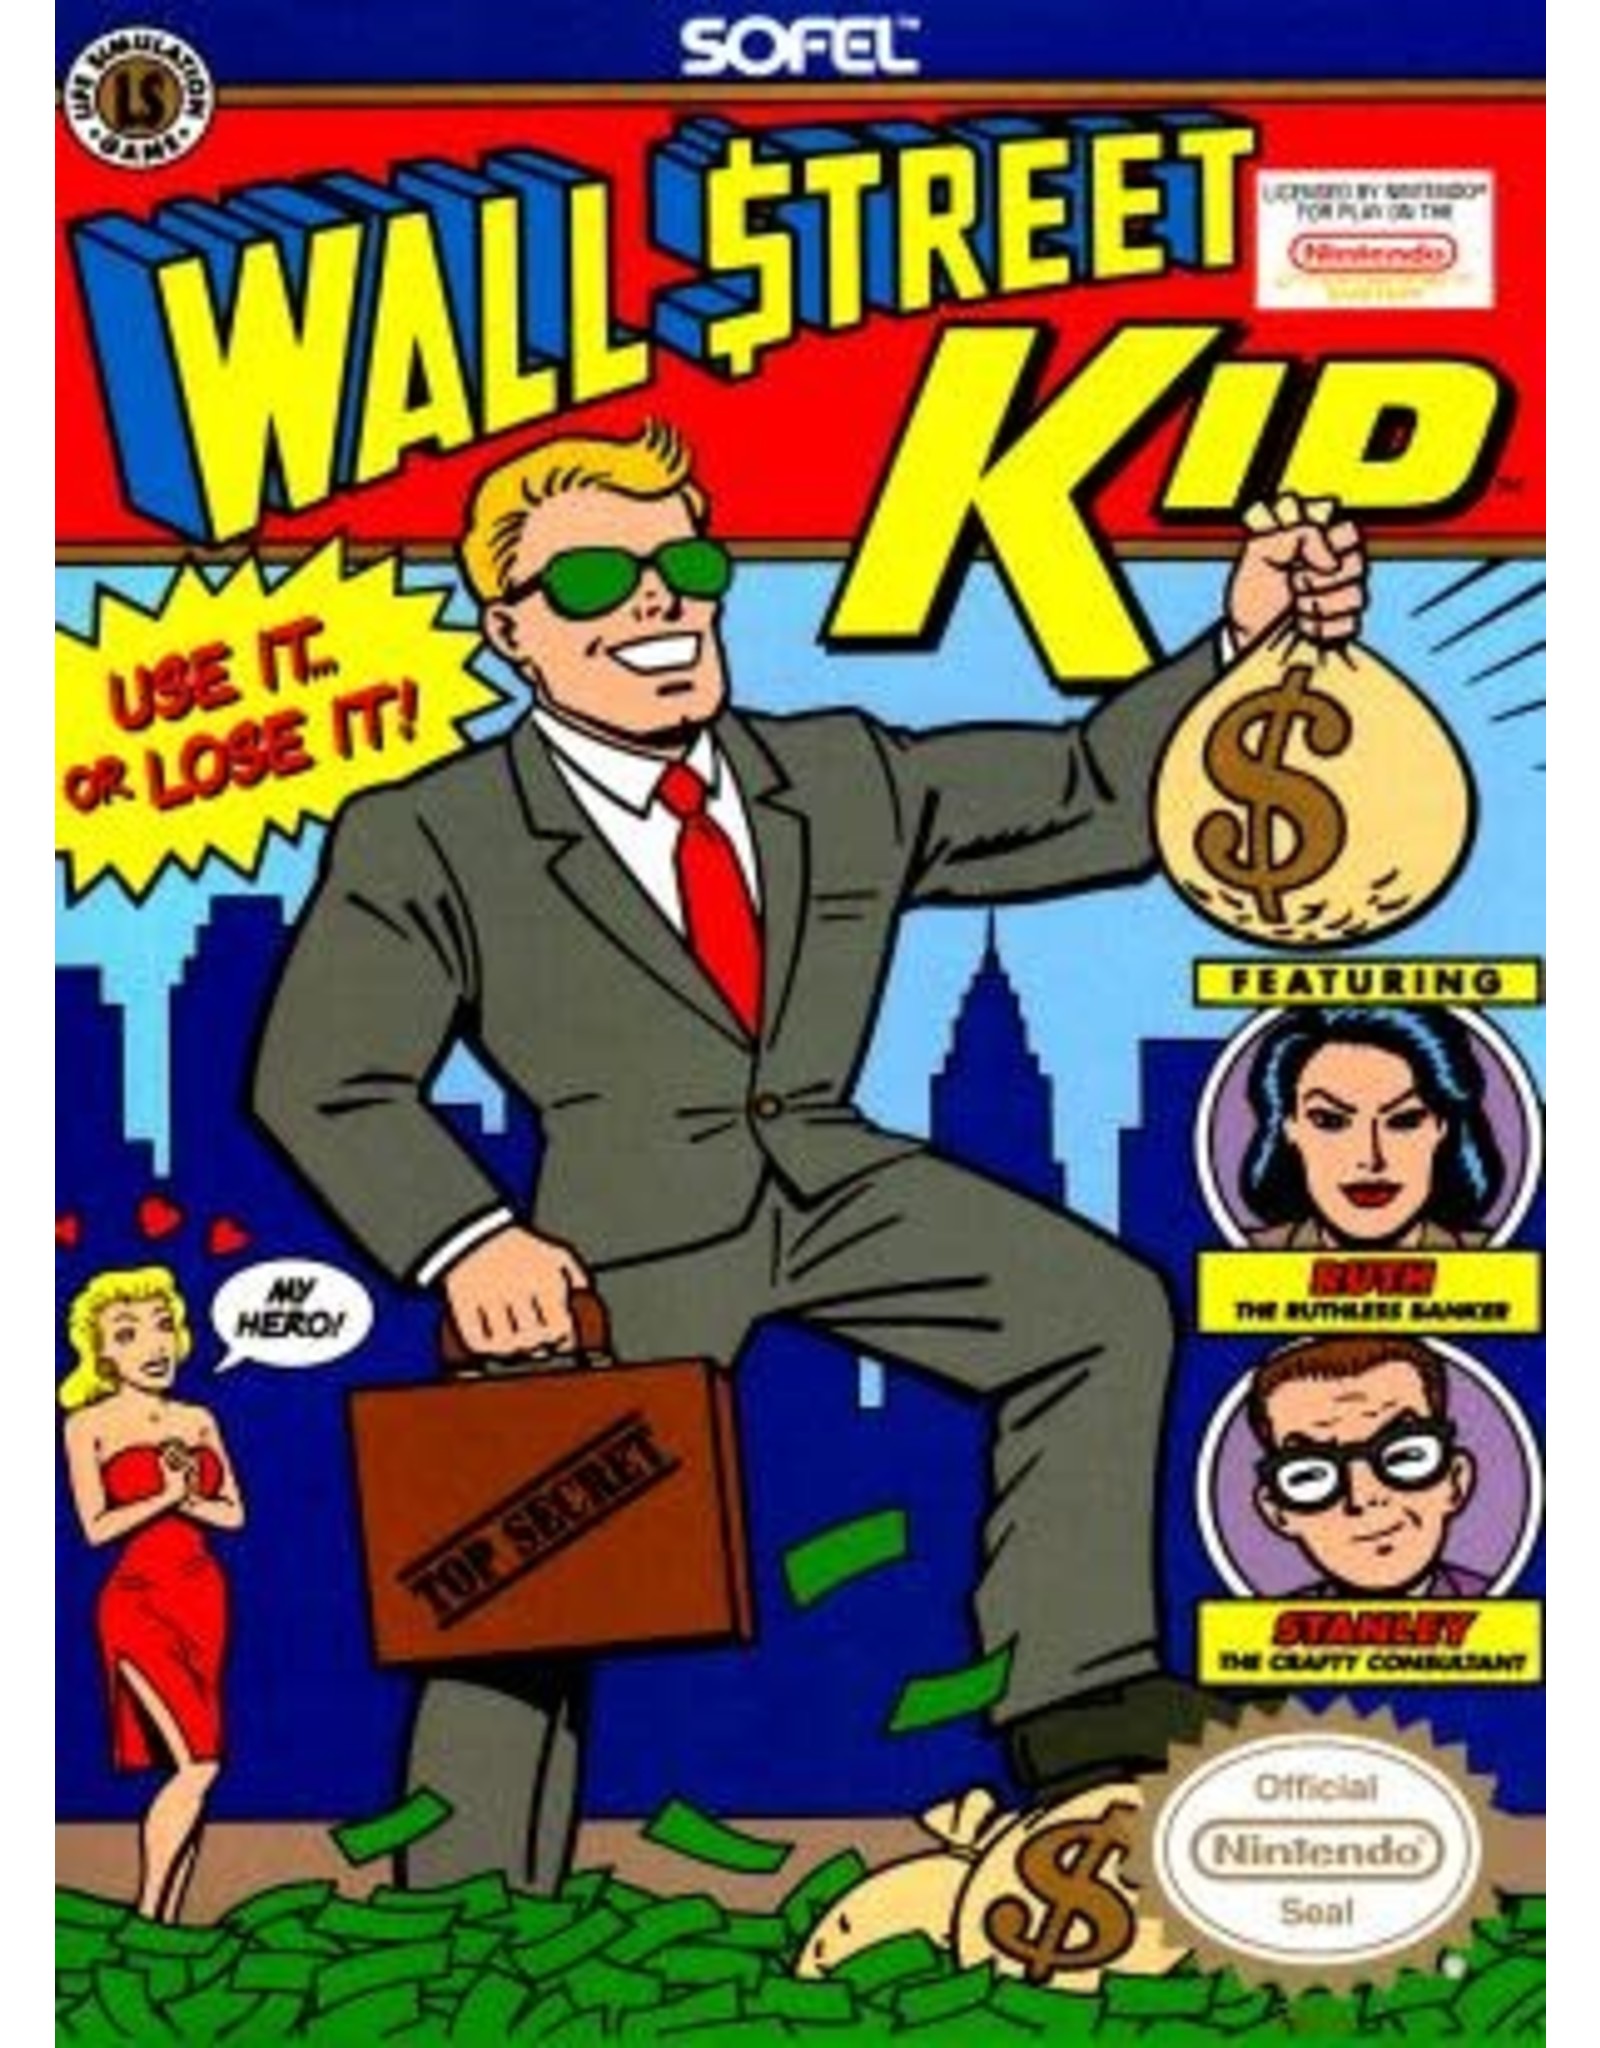 NES Wall Street Kid (Cart Only)